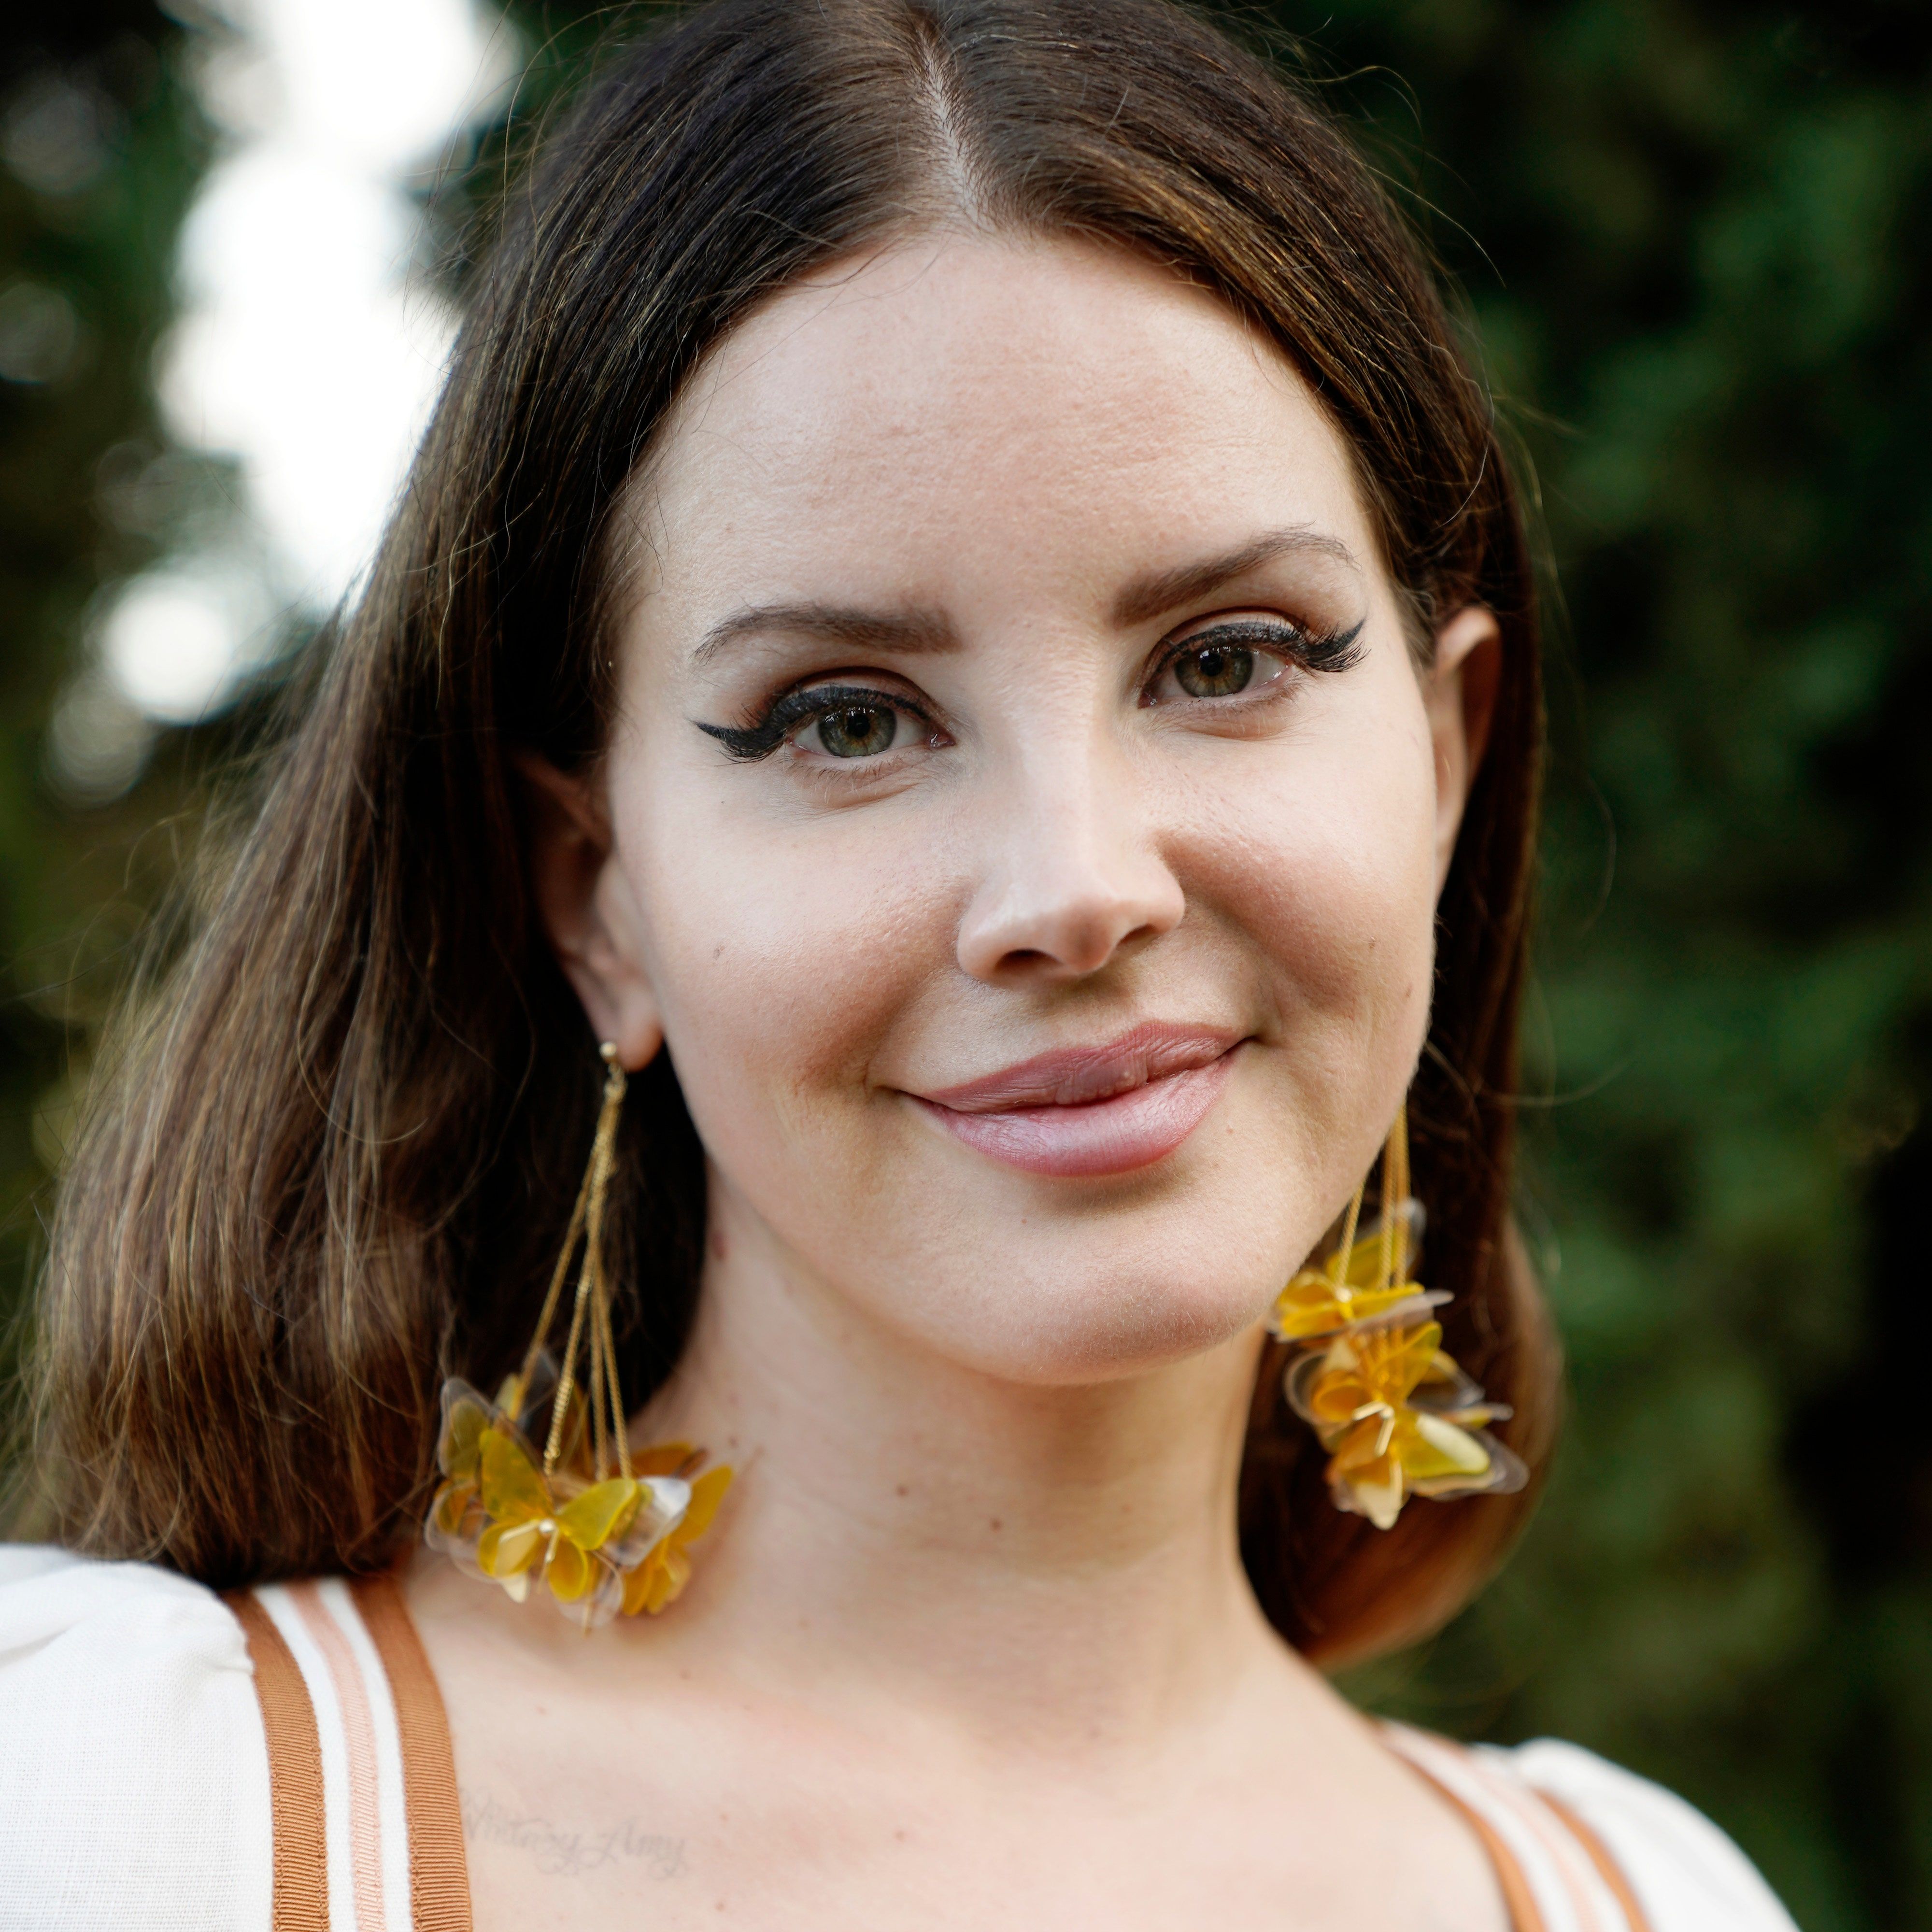 Close up of a woman with long brown hair and green eyes wearing yellow earrings - Lana Del Rey